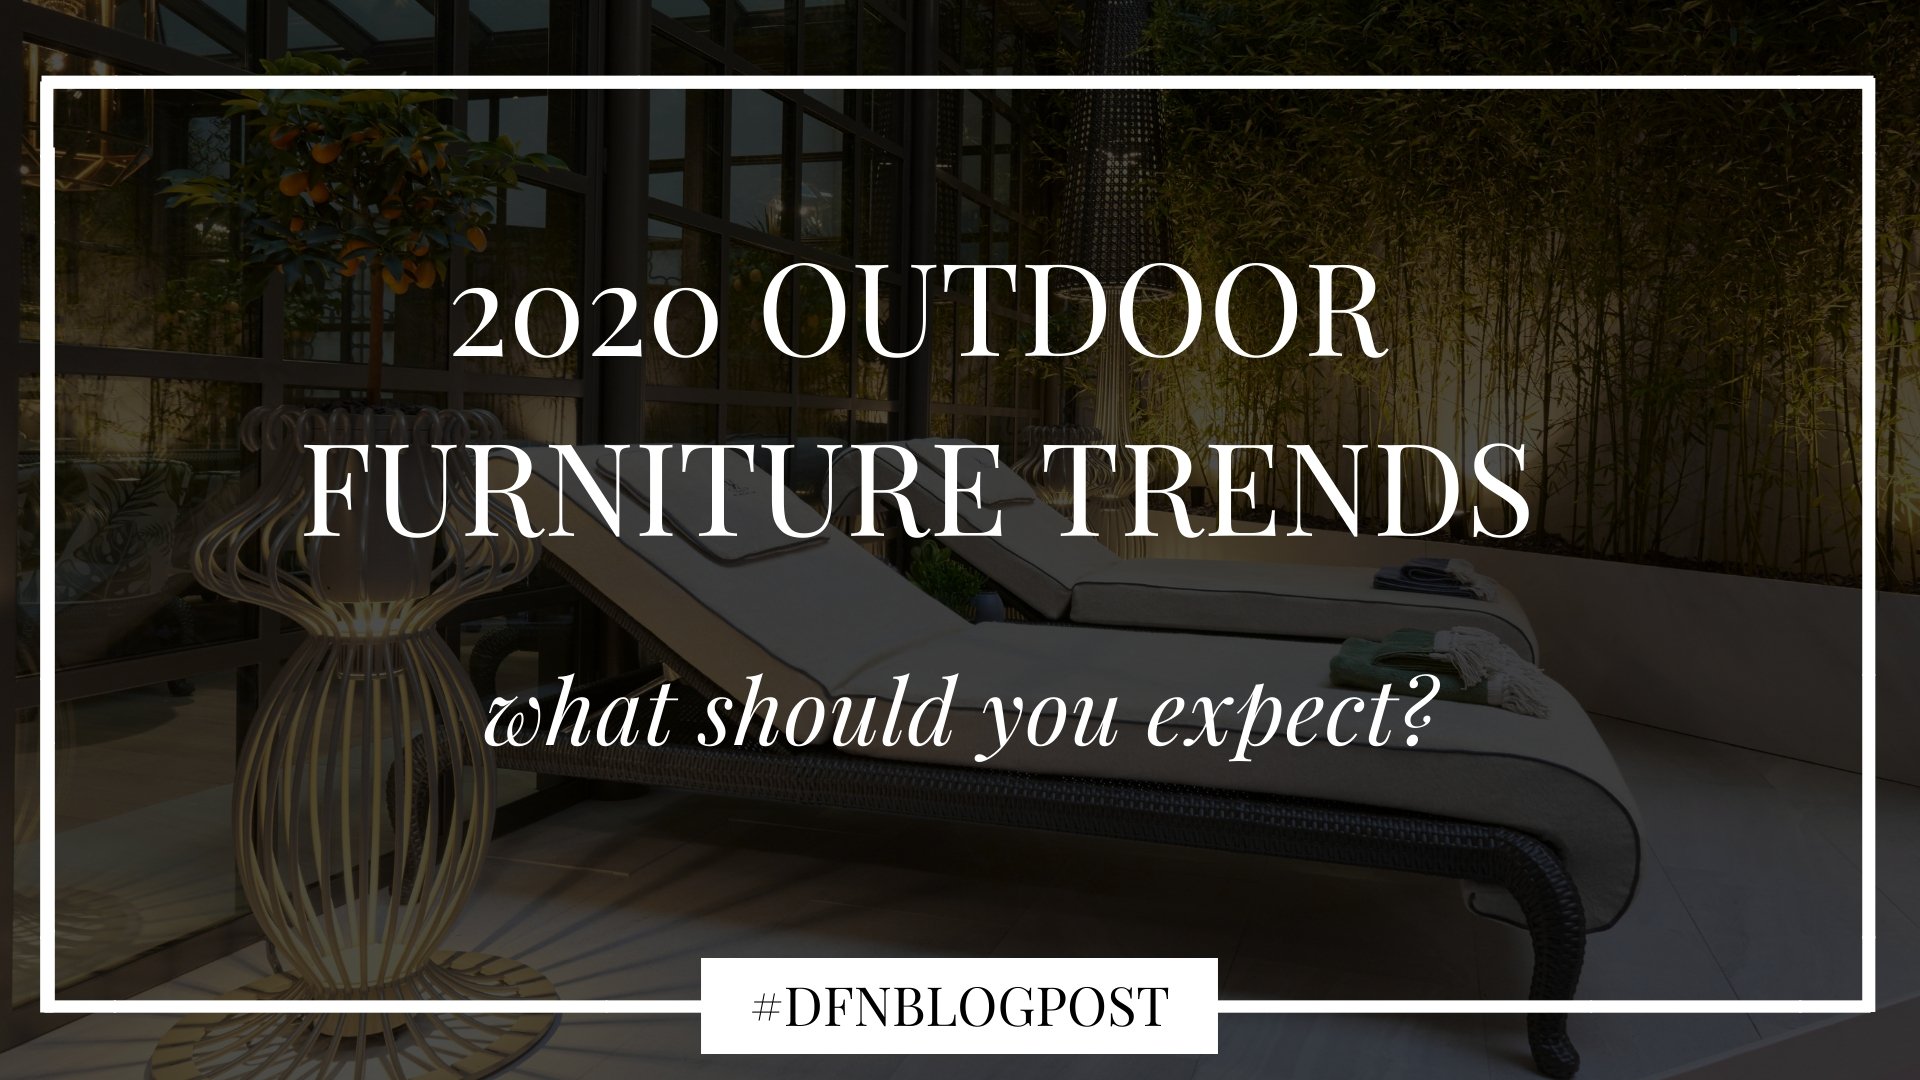 Outdoor furniture trends for 2020: What should you expect?